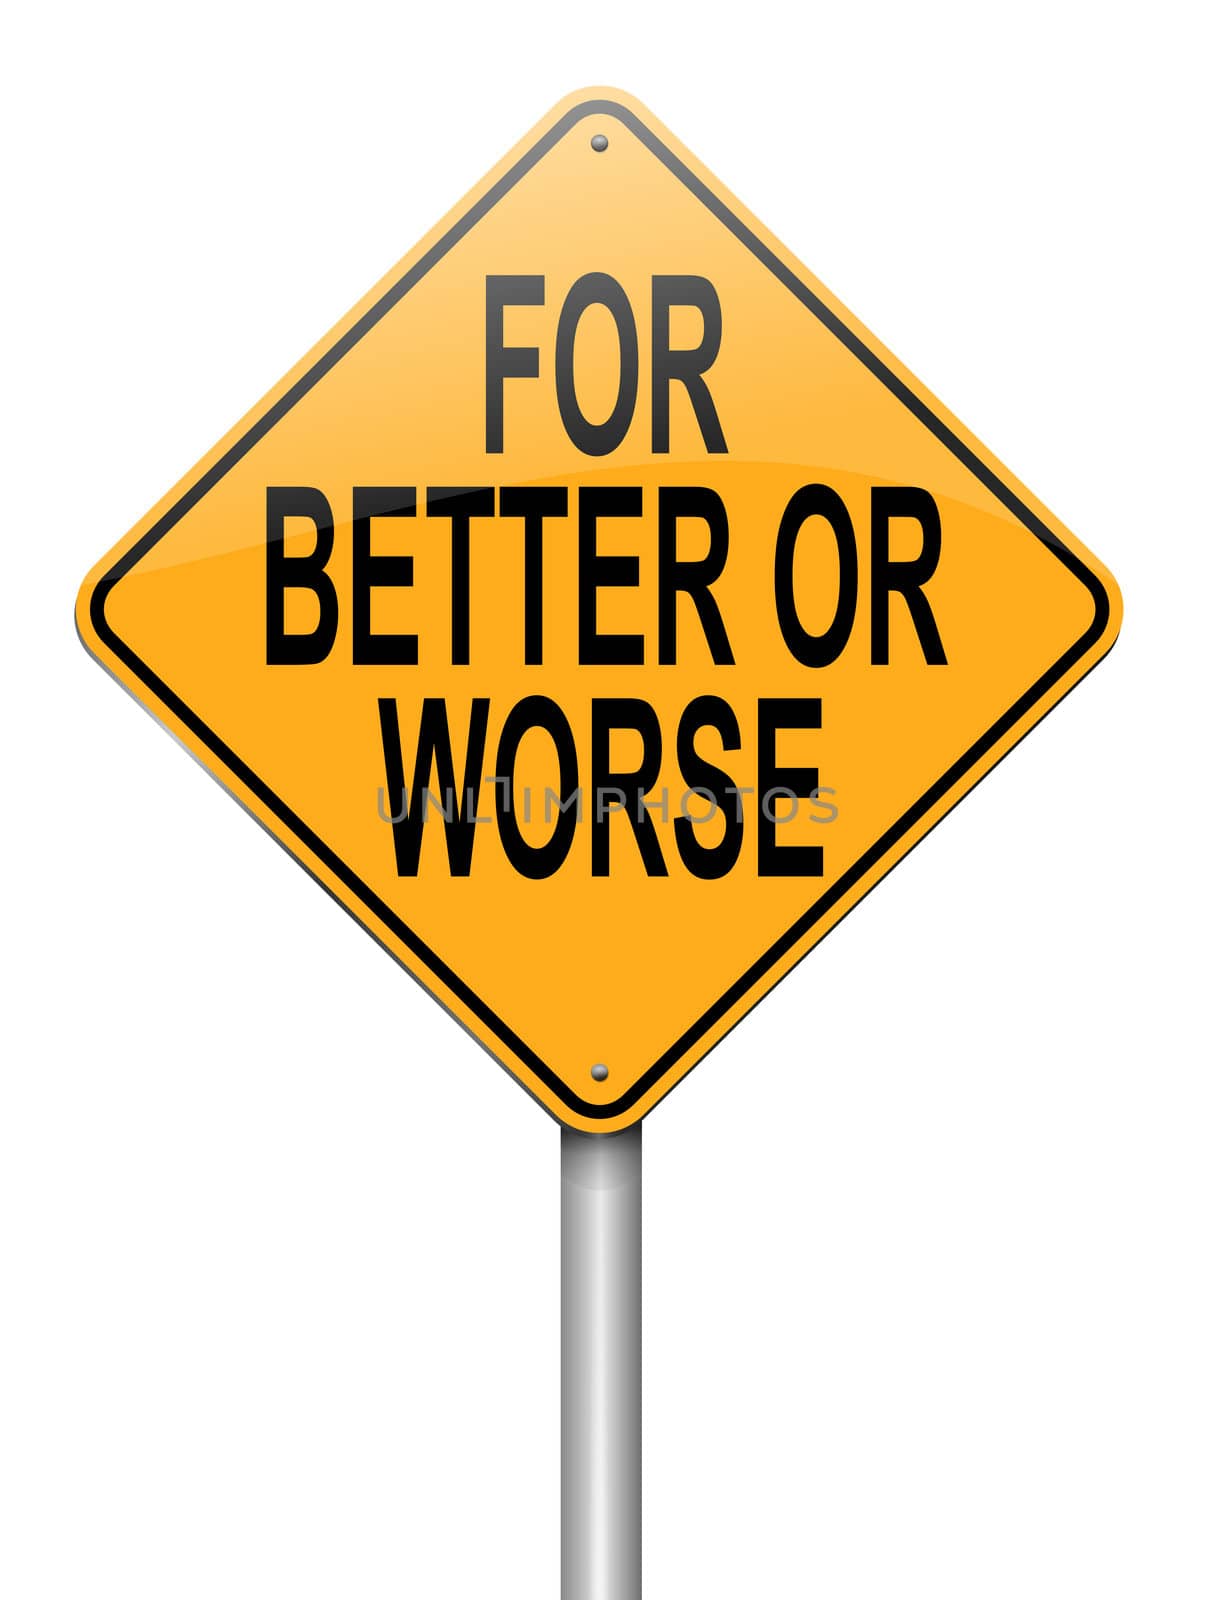 Illustration depicting a roadsign with a for better or worse concept. White background.